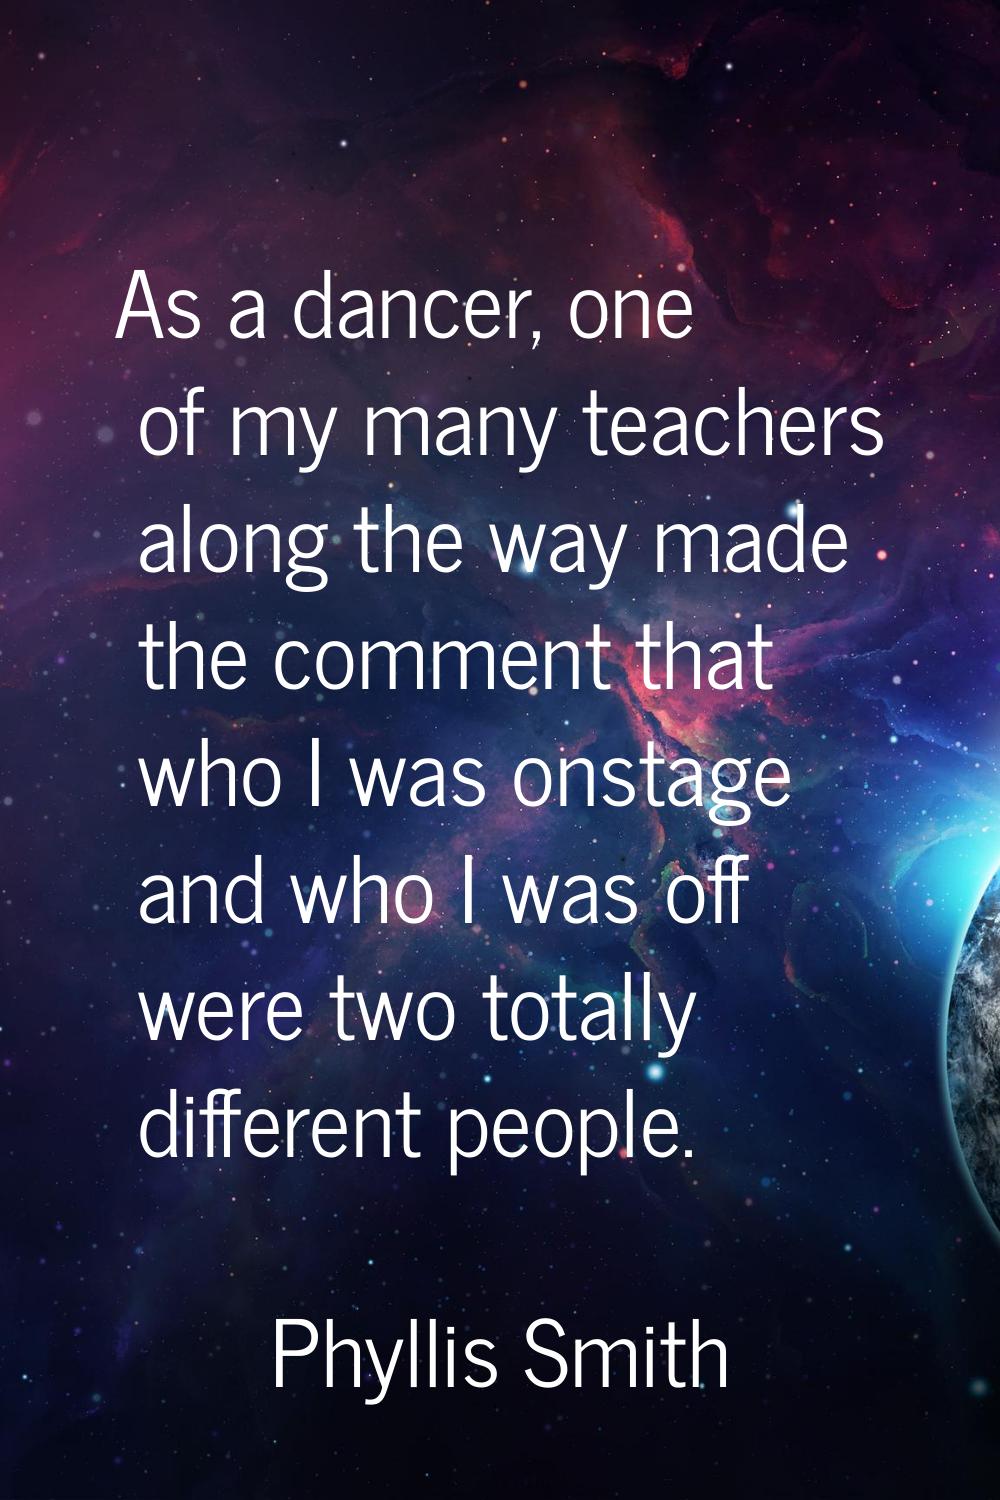 As a dancer, one of my many teachers along the way made the comment that who I was onstage and who 